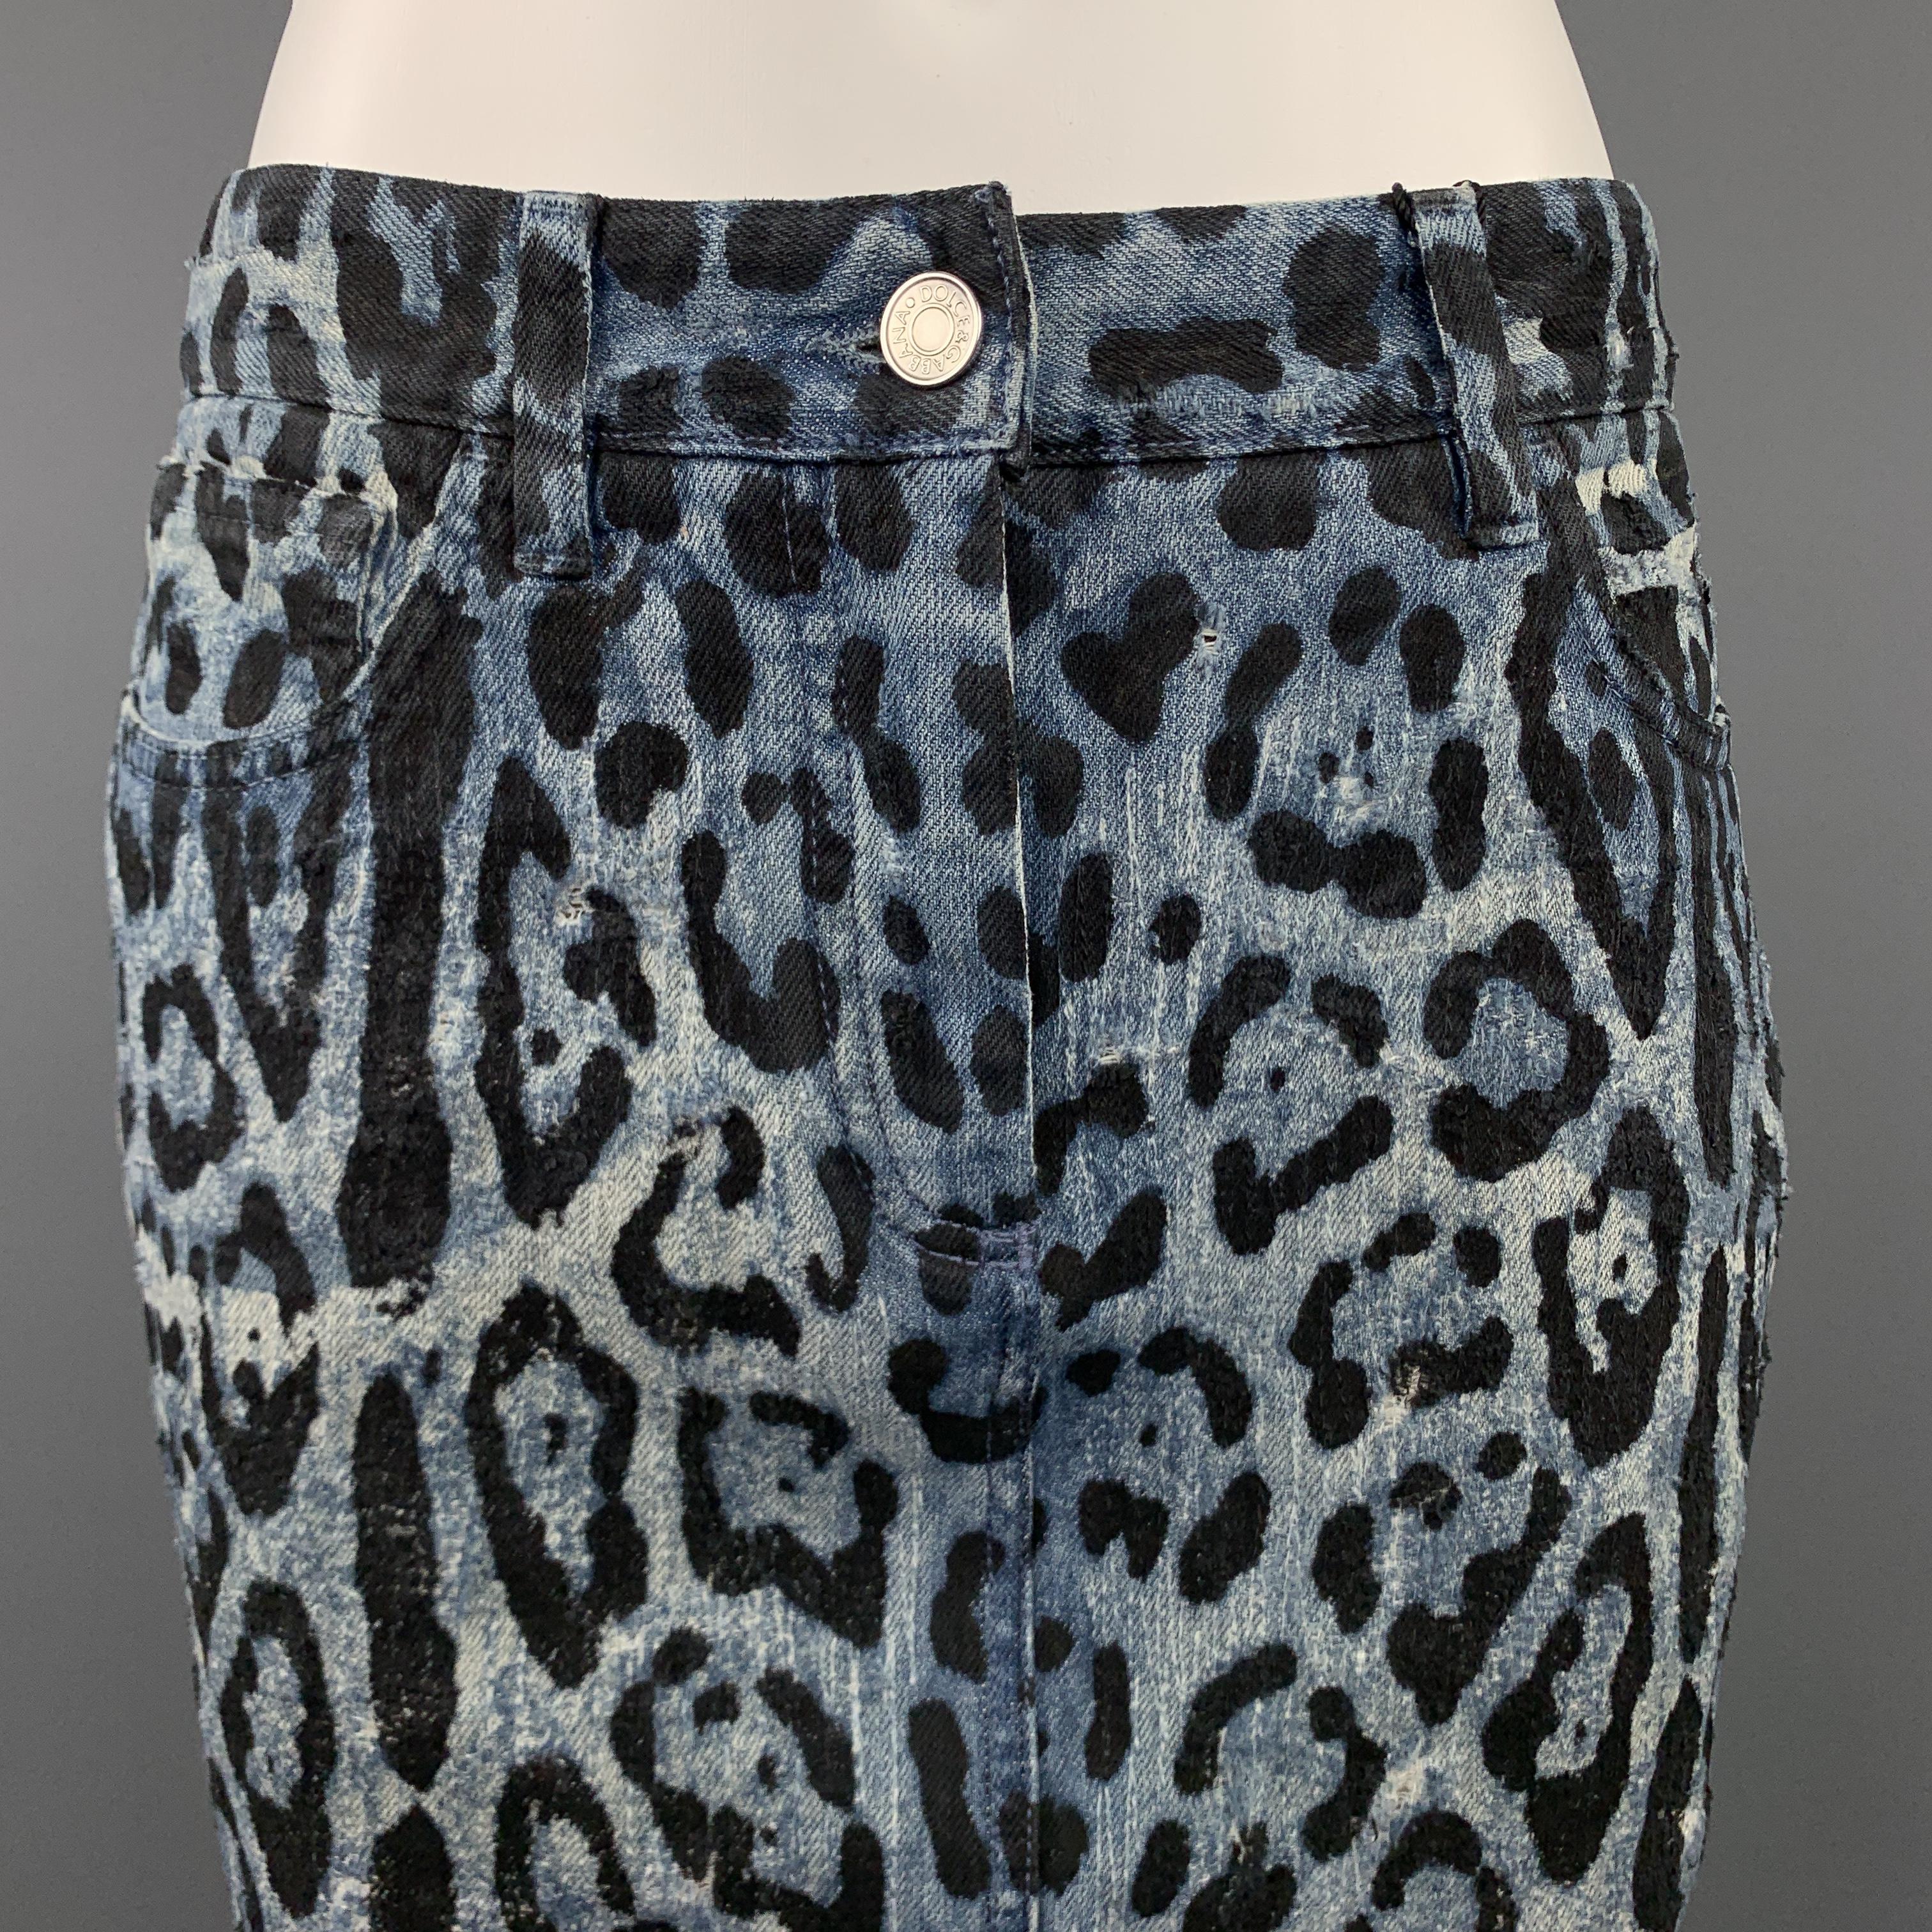 DOLCE & GABBANA pencil skirt comes in washed blue and black leopard print denim with distressing throughout, metal embossed back plaque, and pencil skirt silhouette. Made in Italy.

New with Tags. 
Marked: IT 42
Original Retail Price: